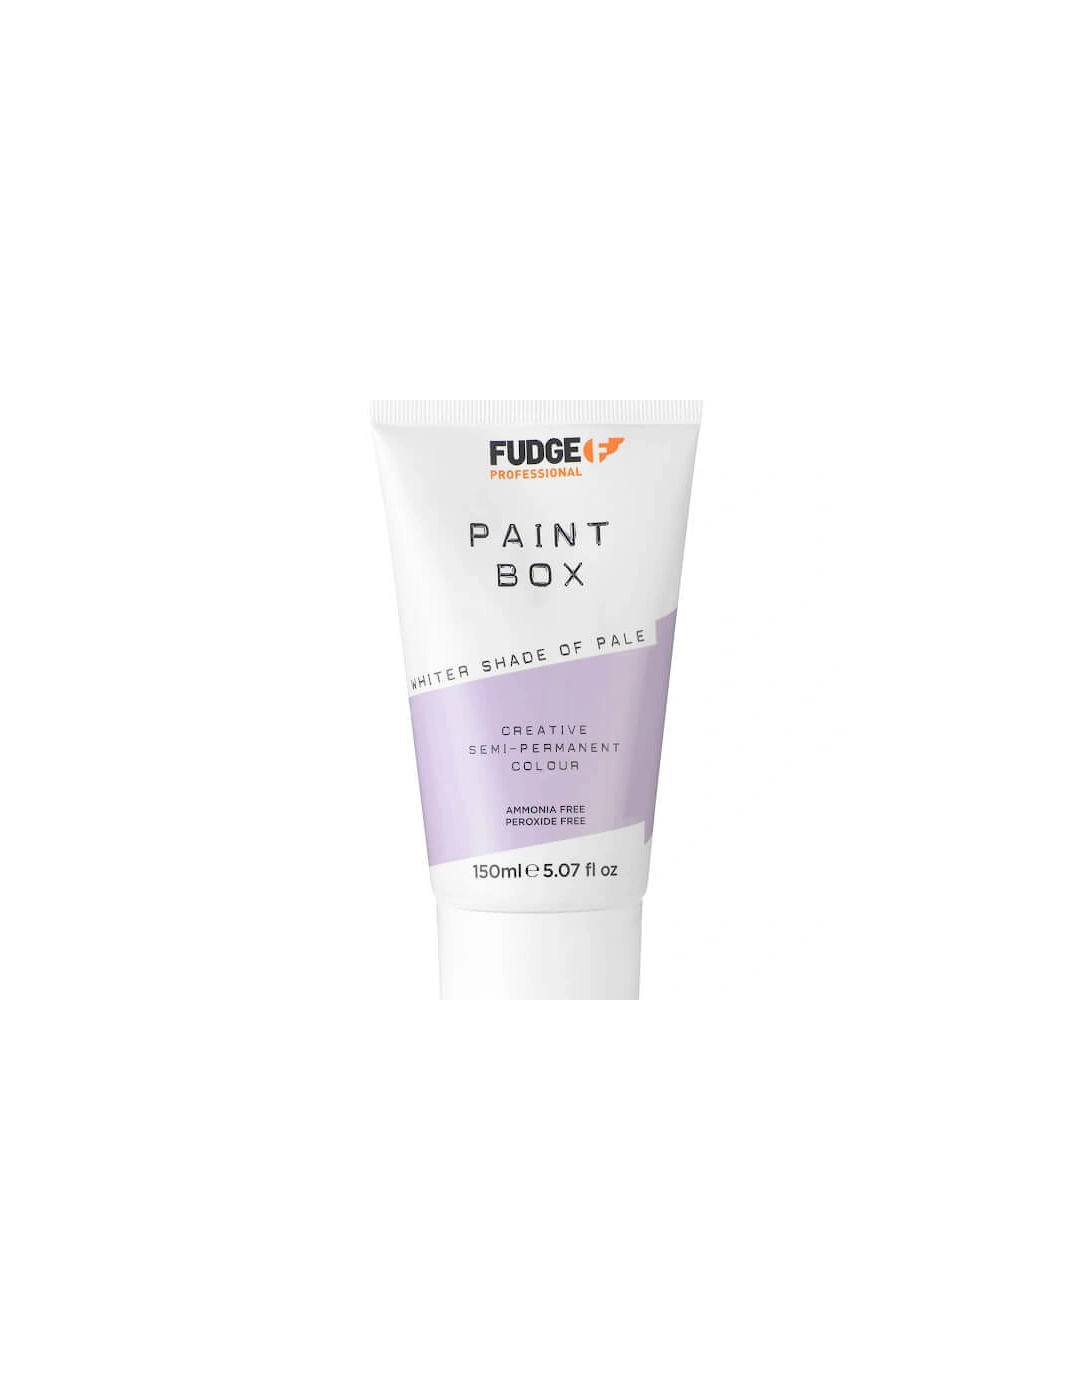 Whiter Shade Of Pale (150ml), 2 of 1